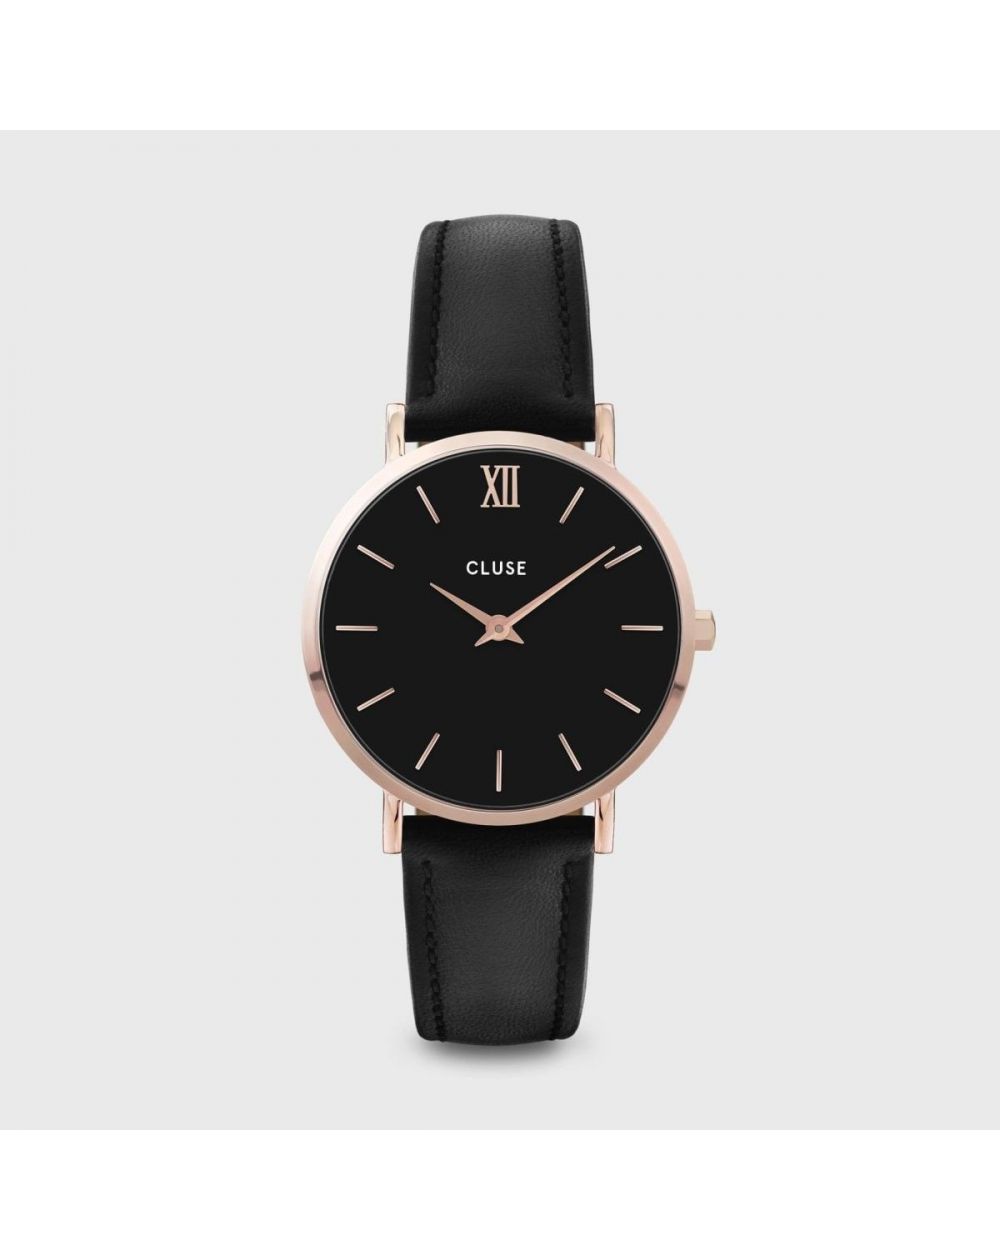 Watch CLUSE - The midnight rose gold white / black